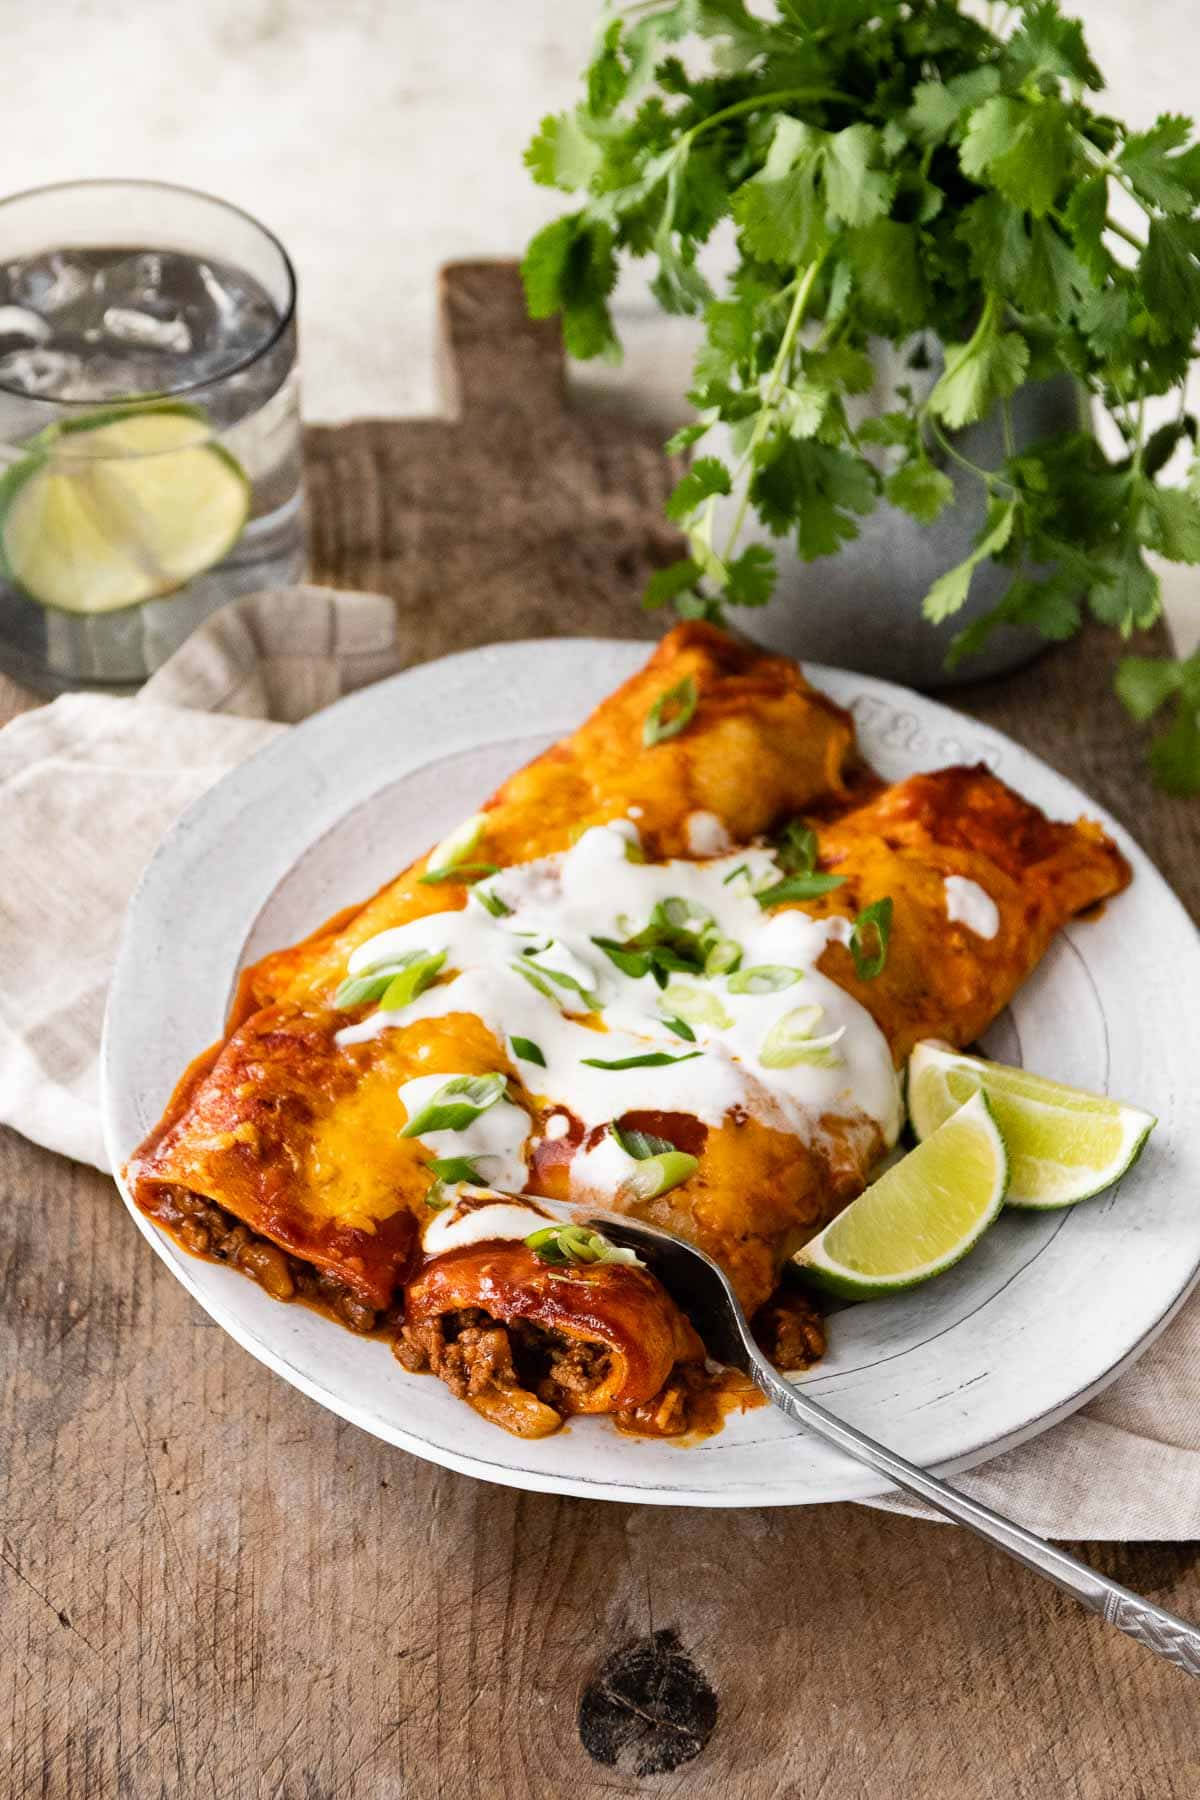 Enchiladas And Sour Cream With Limes Wallpaper